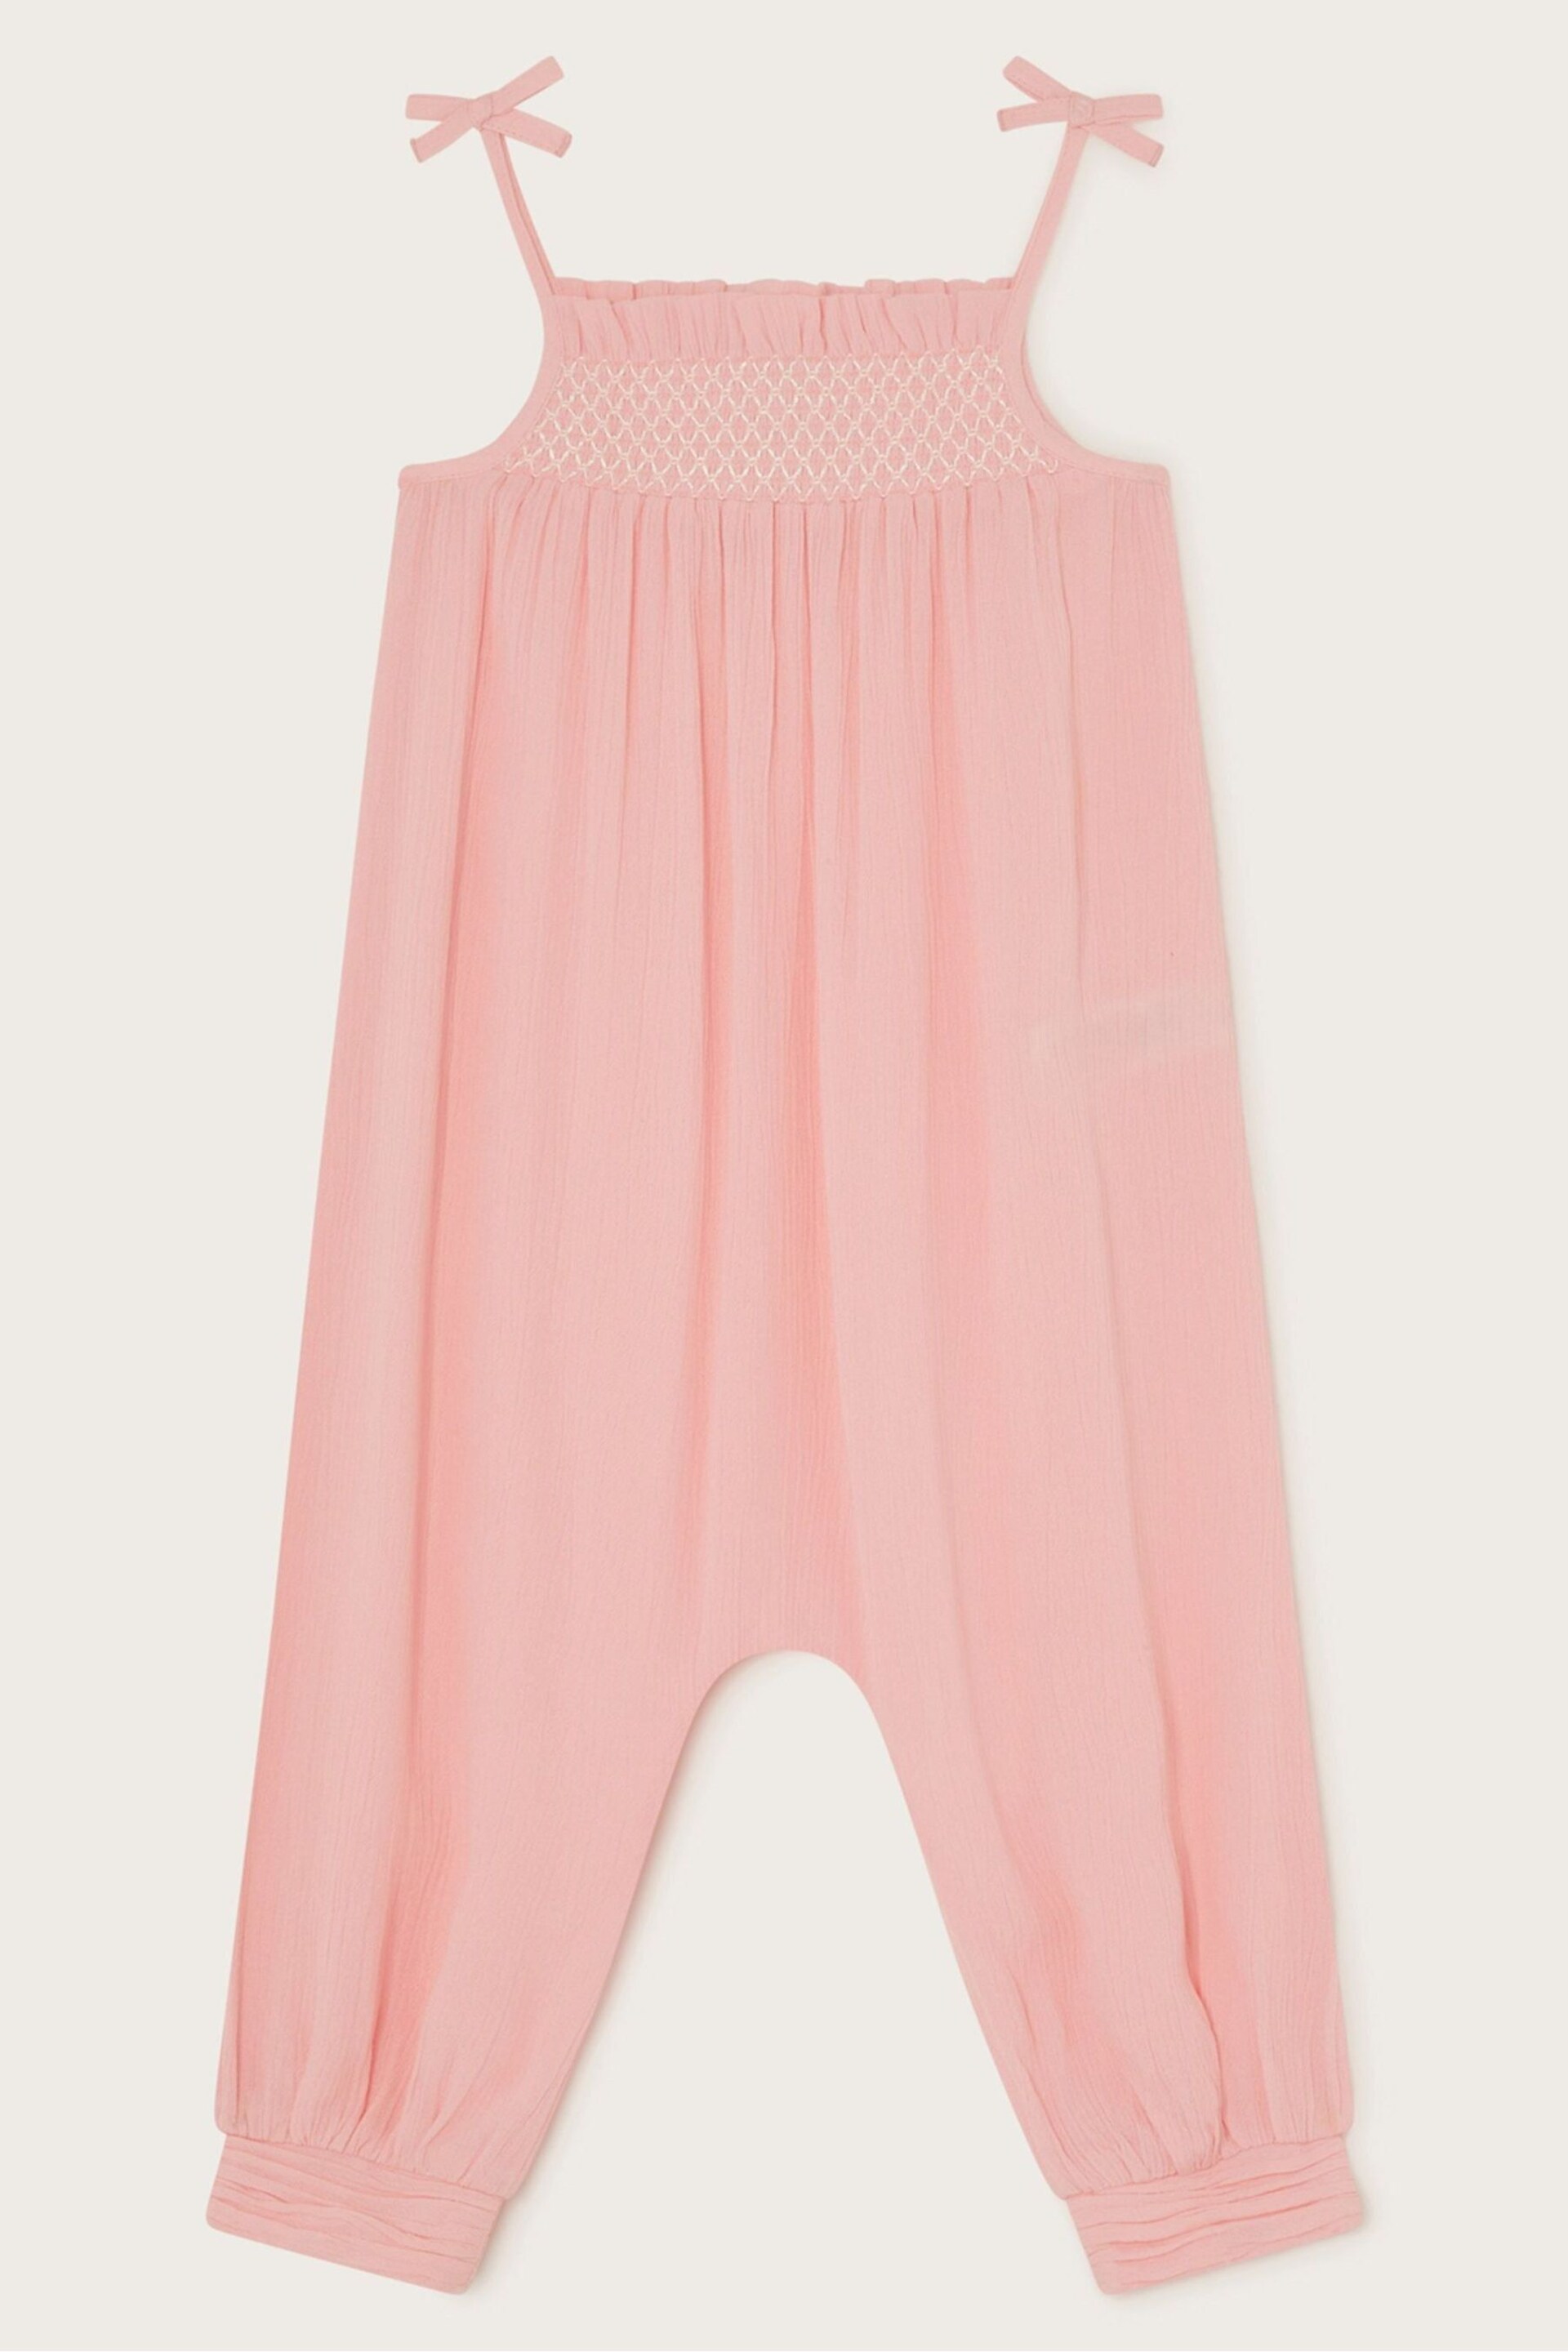 Monsoon Pink Baby Shirred Jumpsuit - Image 1 of 3